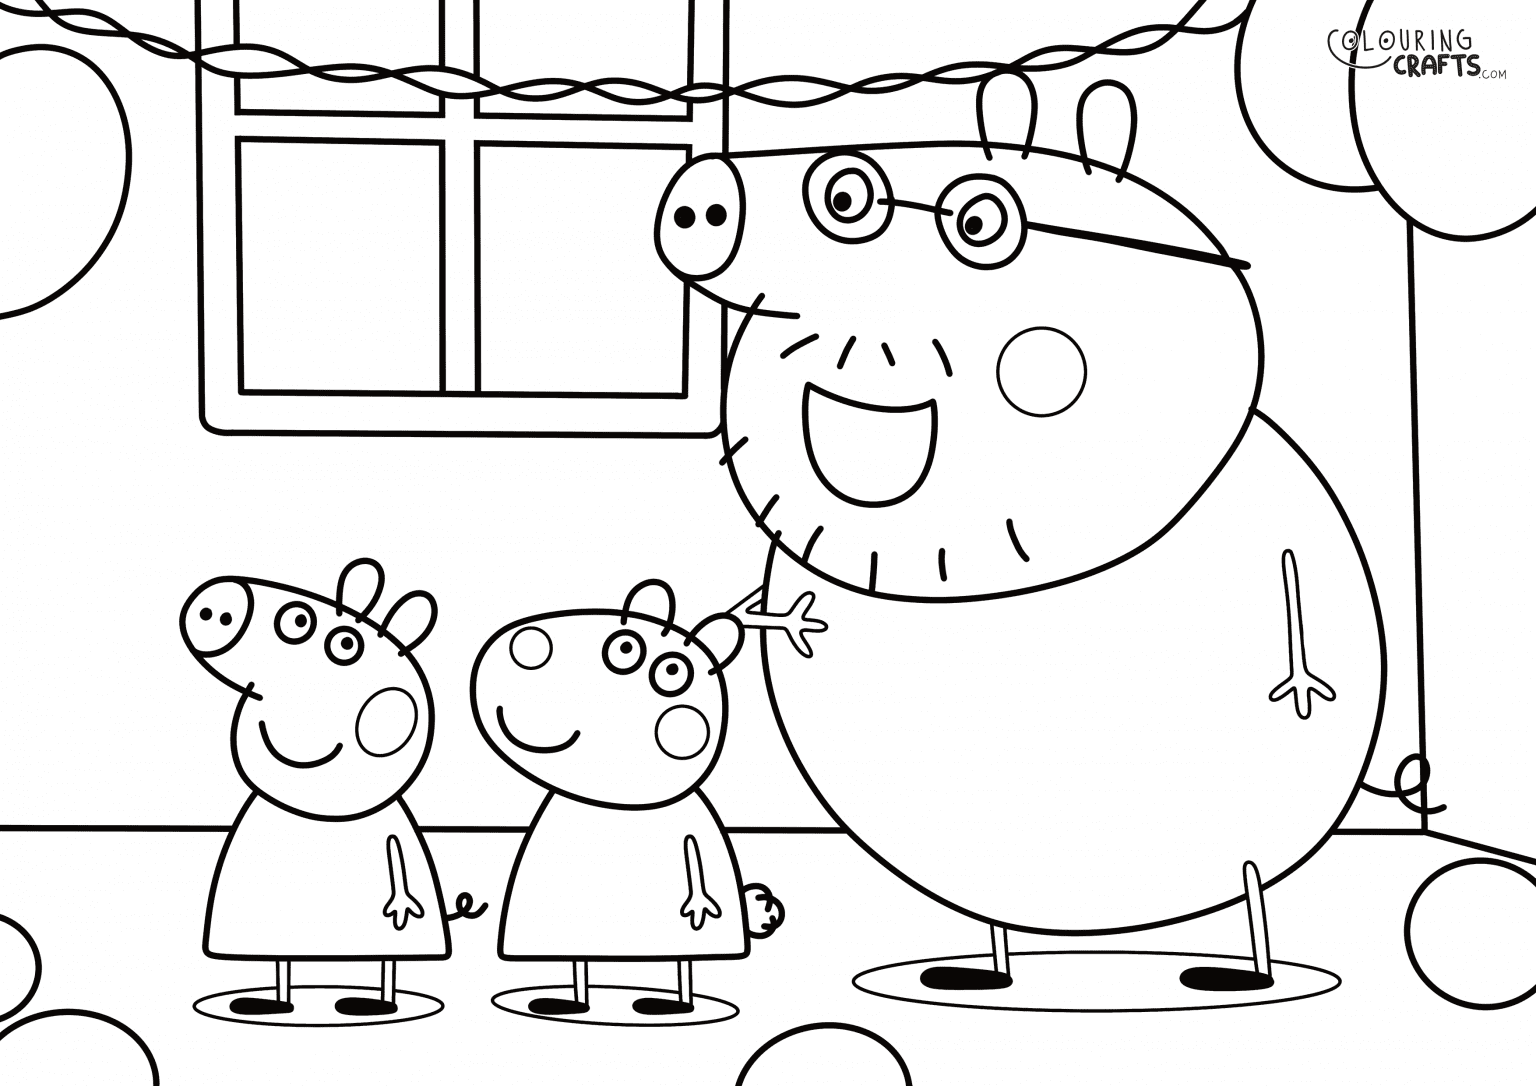 Peppa Pig Party Colouring Page - Colouring Crafts